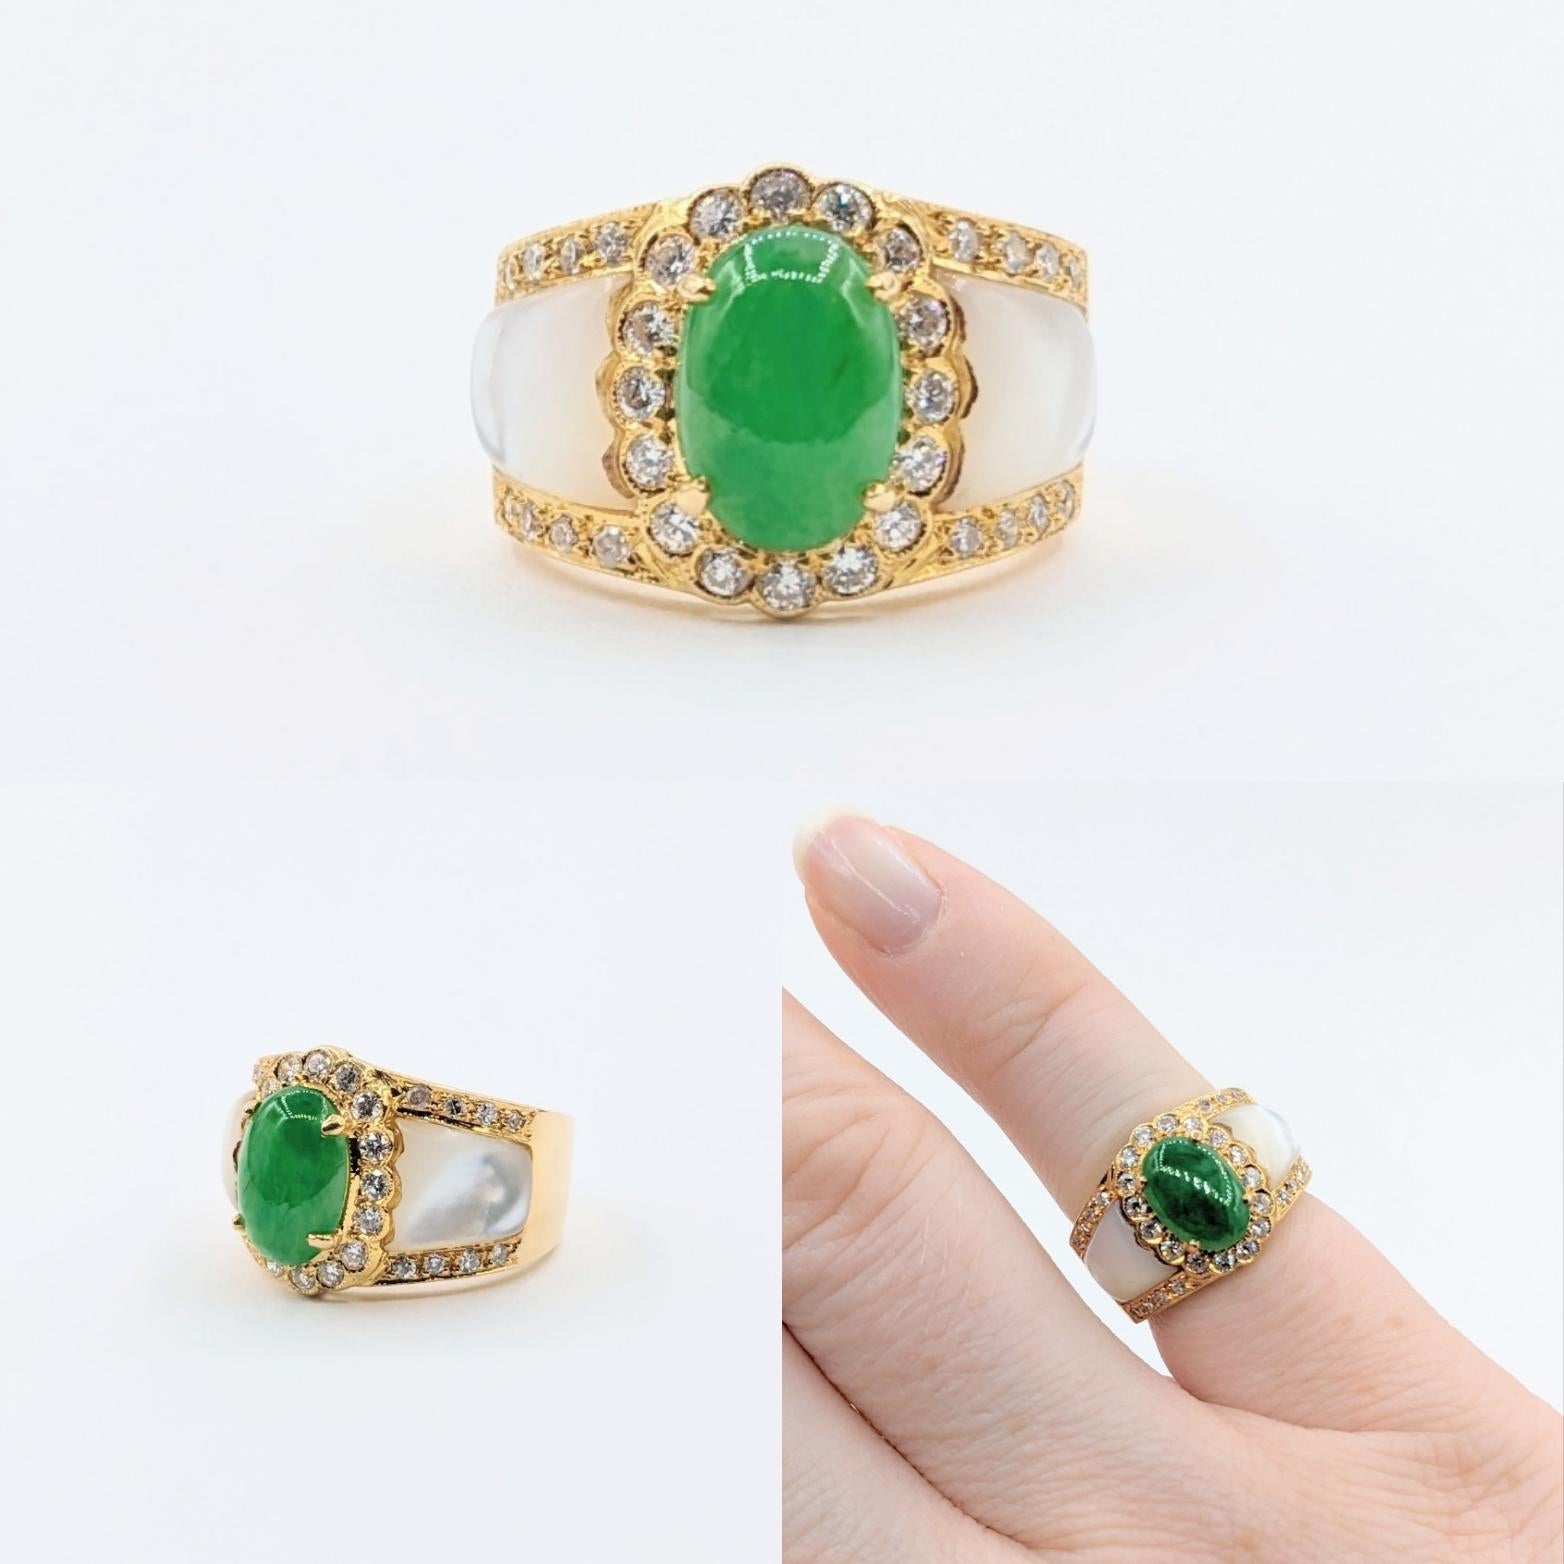 Romantic 21k Jade, Diamond & Mother of Pearl Ring

Magnificently set in 21k yellow gold, this ring proudly showcases .25ctw round diamonds. These gleaming diamonds have an SI2 clarity and a lustrous H-I color. Augmenting the design is a harmonious